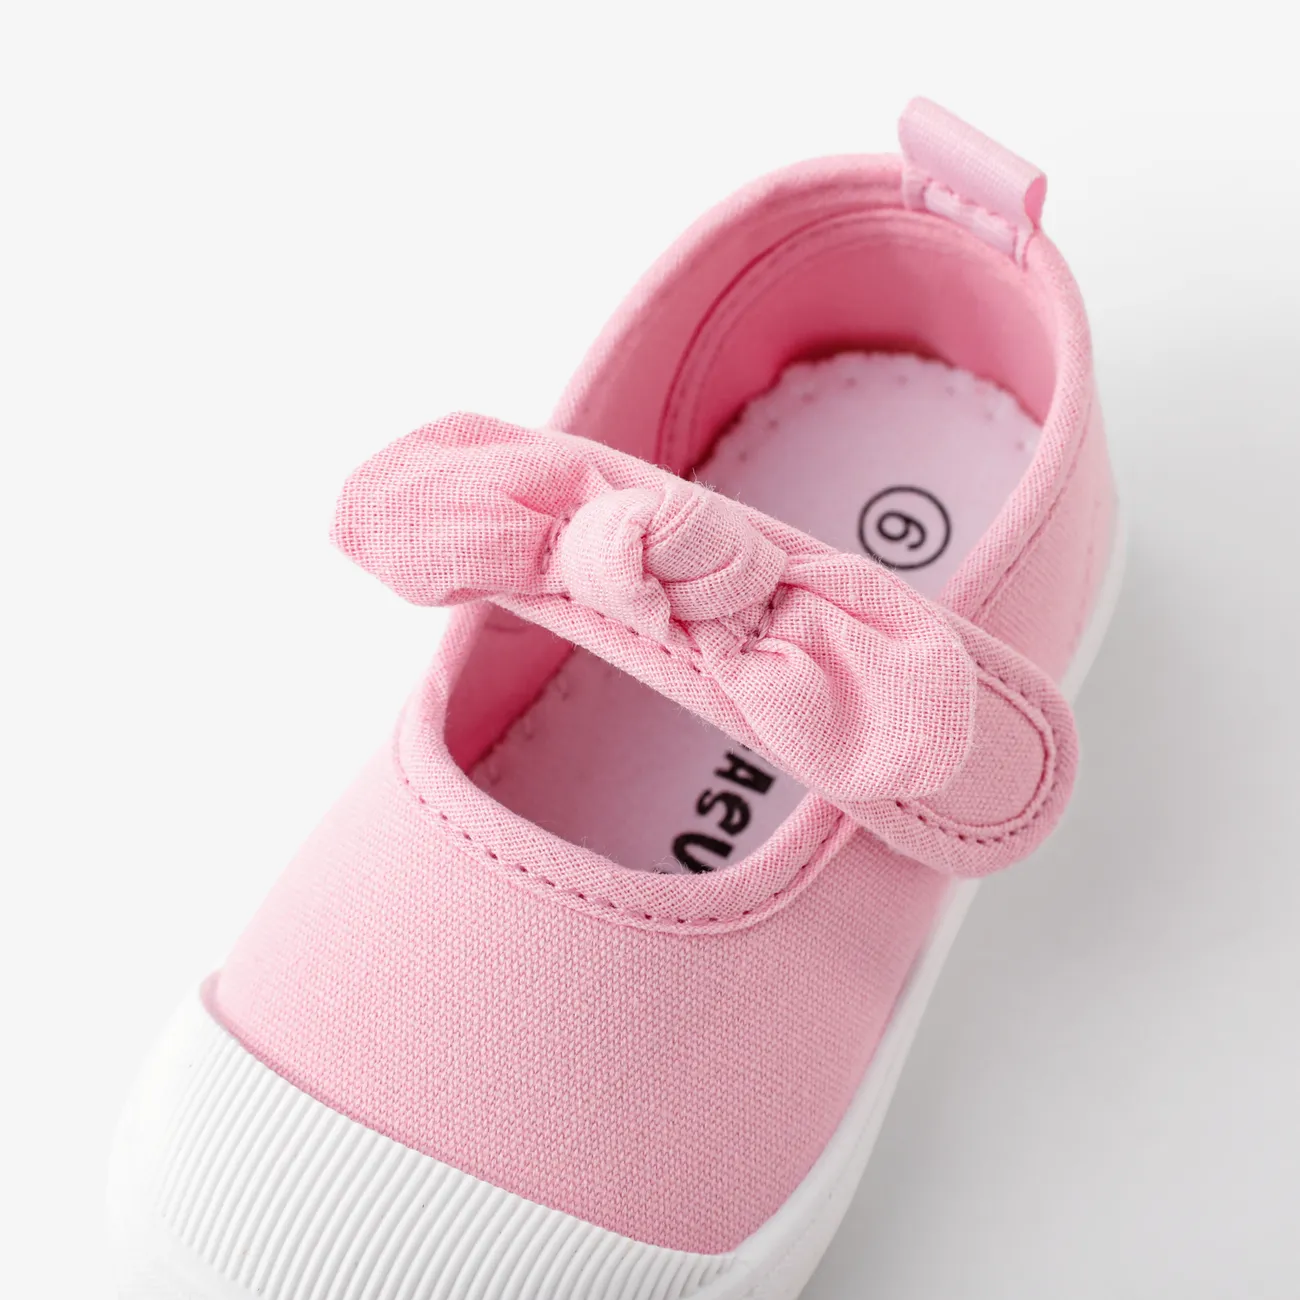 Toddler/Kids Girl 3D Hyper-Tactile Bow-tie Casual Shoes Light Pink big image 1